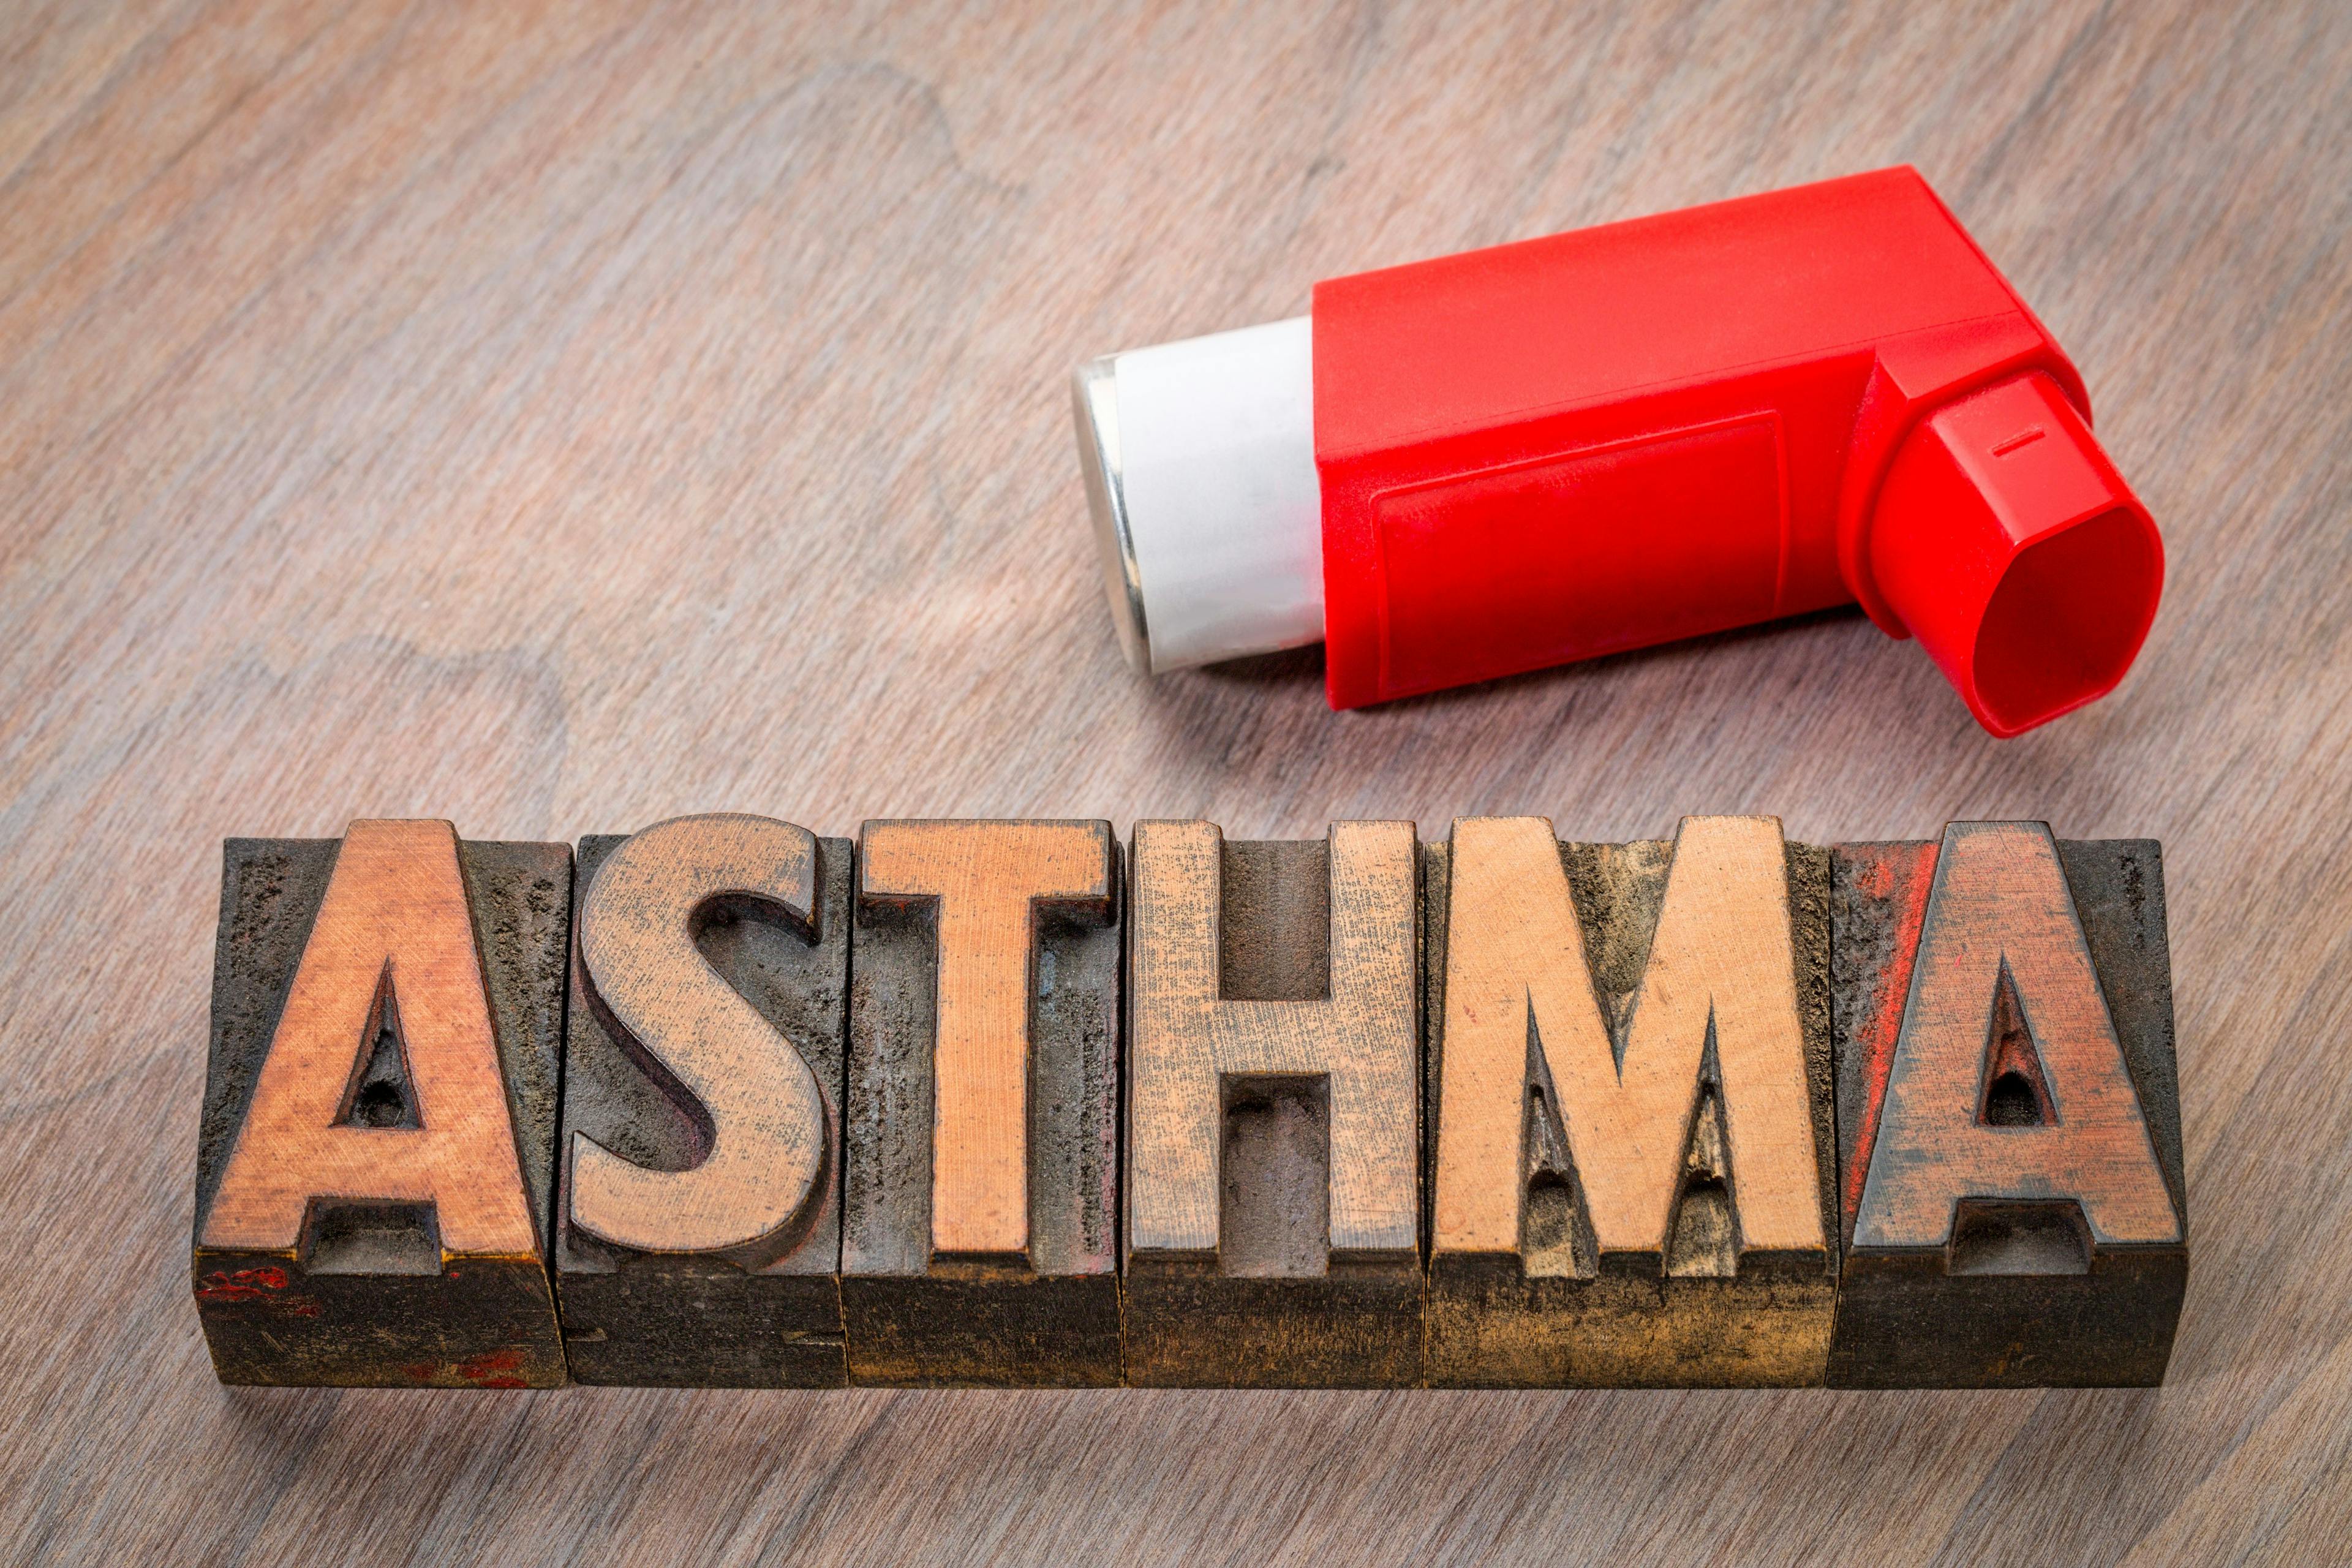 Most Primary Care Physicians Unfamiliar with Biologics to Treat Asthma